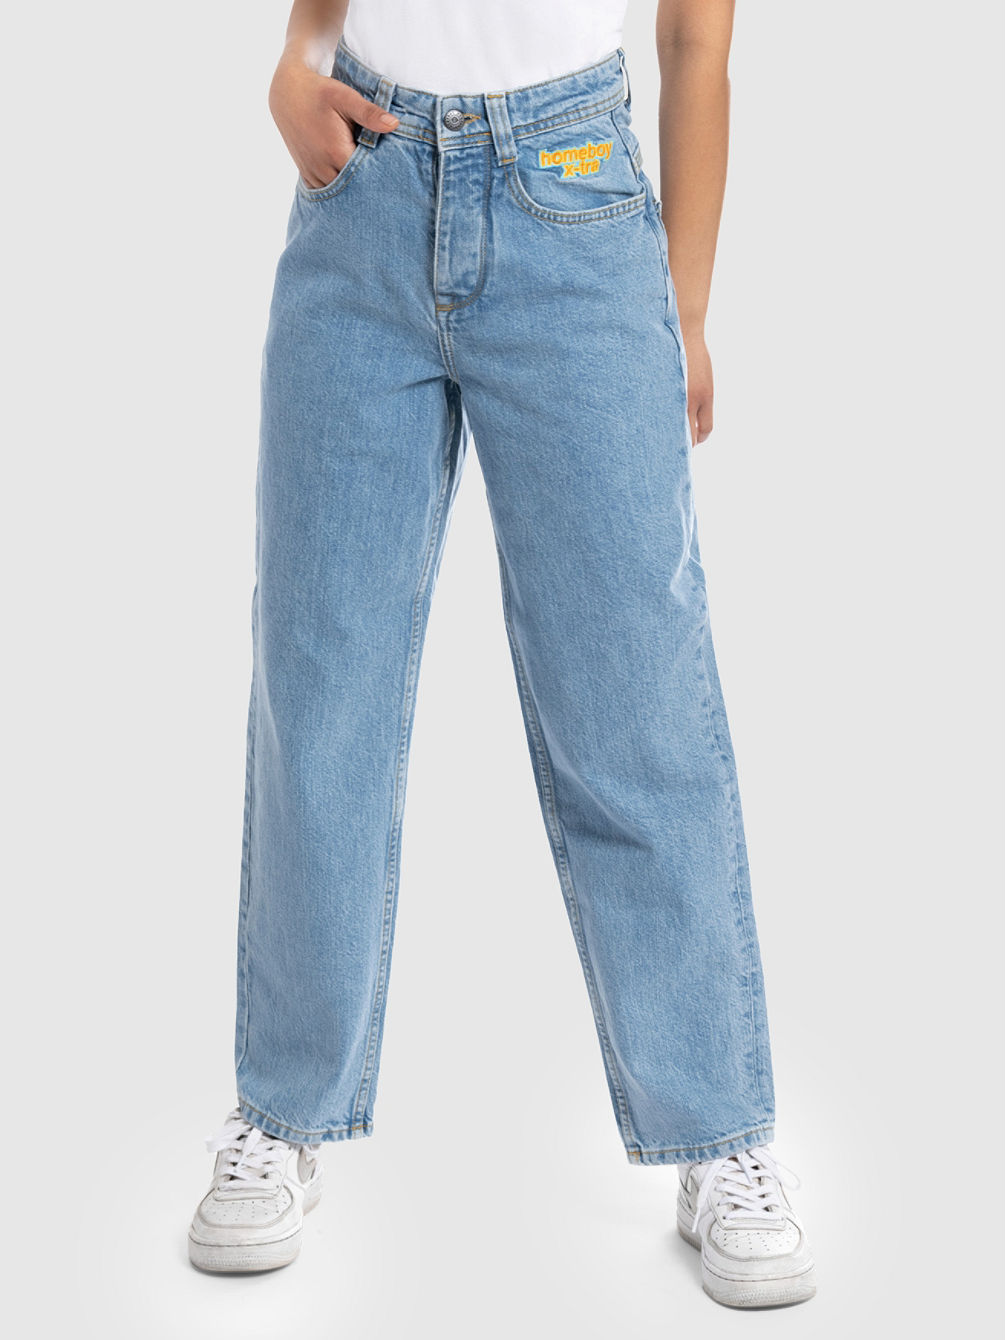 X-Tra BAGGY 28 Jeans